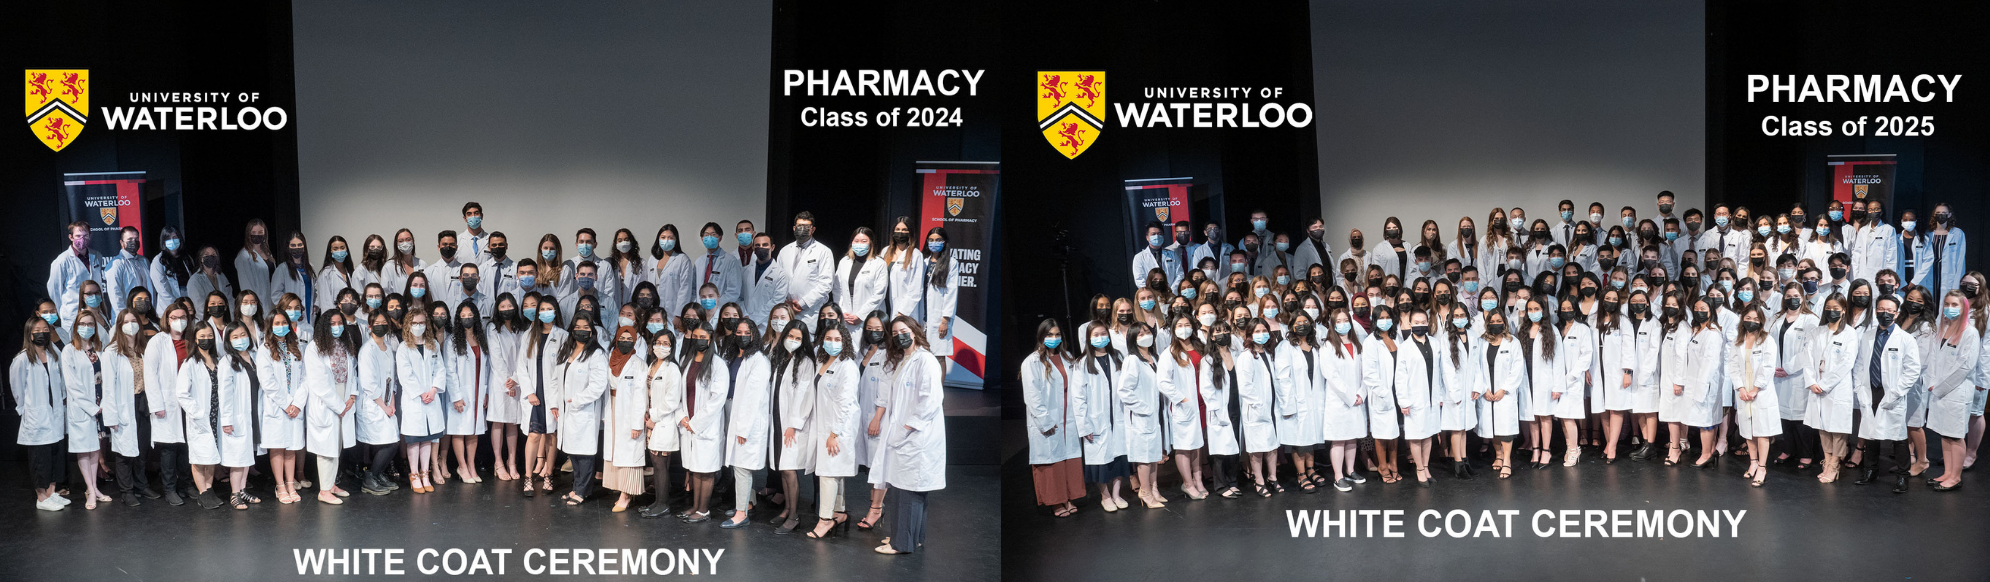 Rx2024 and Rx2025 classes wearing white coats